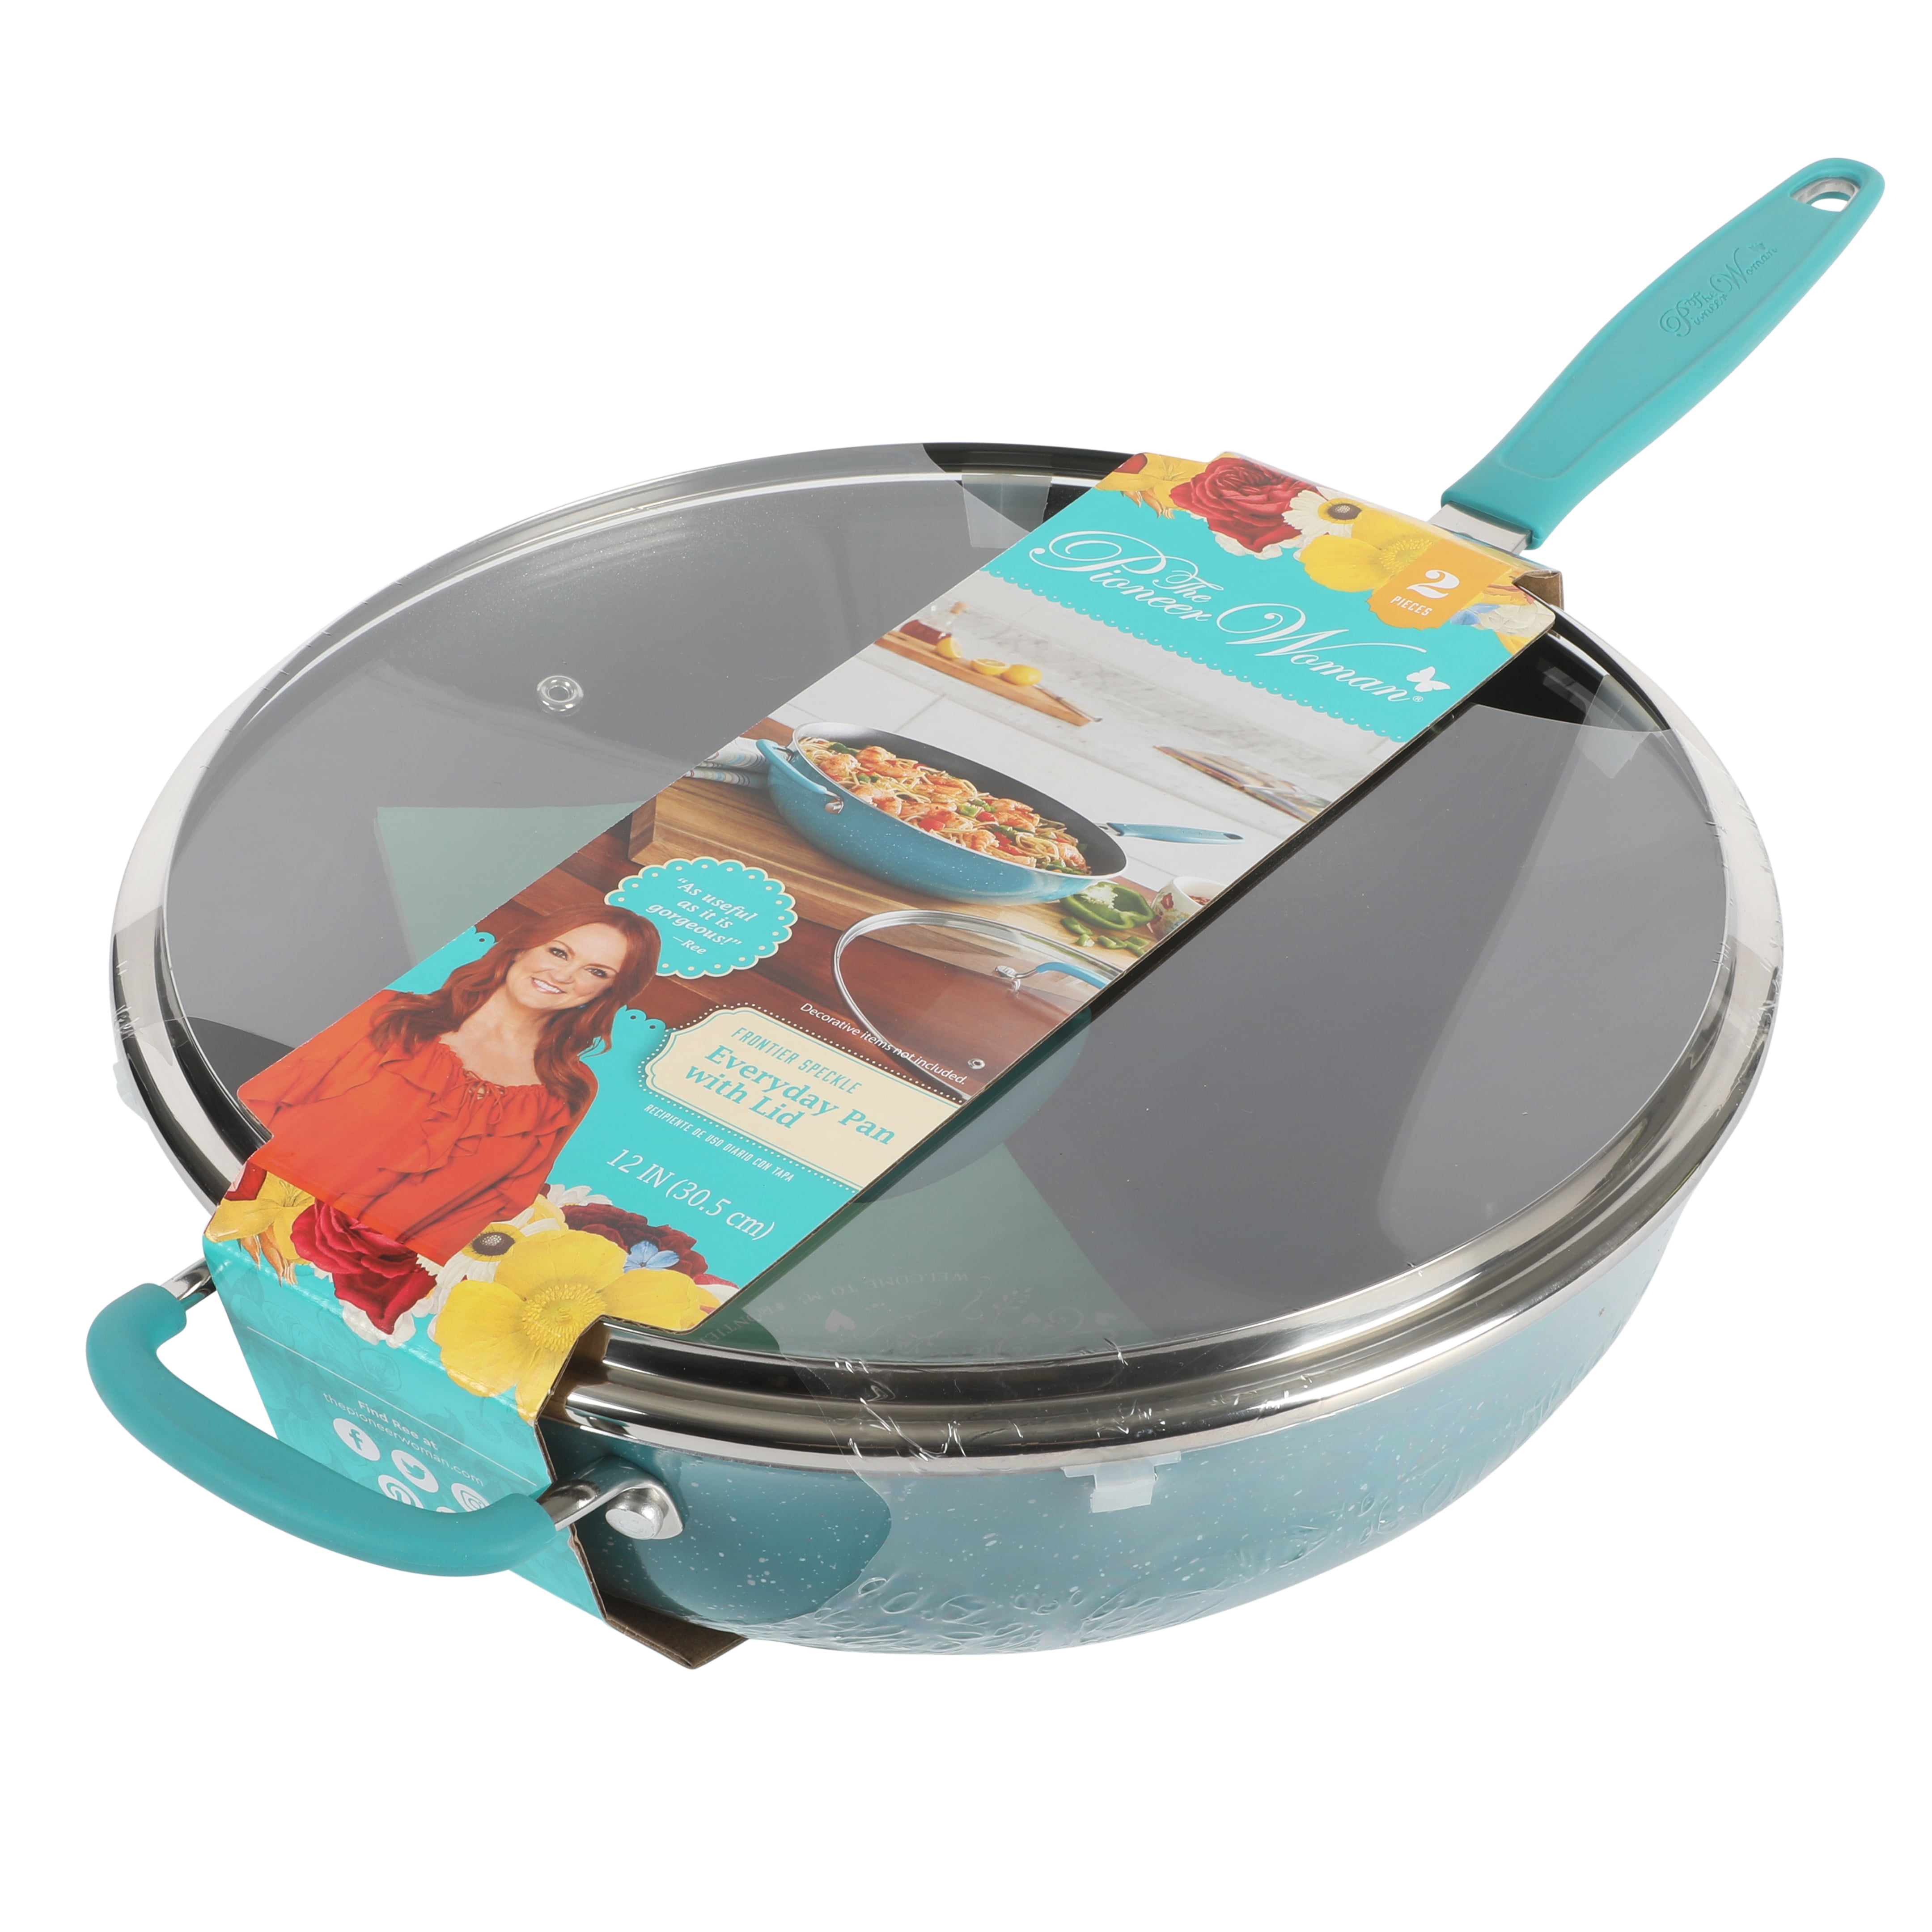 The Pioneer Woman Teal Speckle Timeless 12-Cavity Nonstick Muffin Pan 